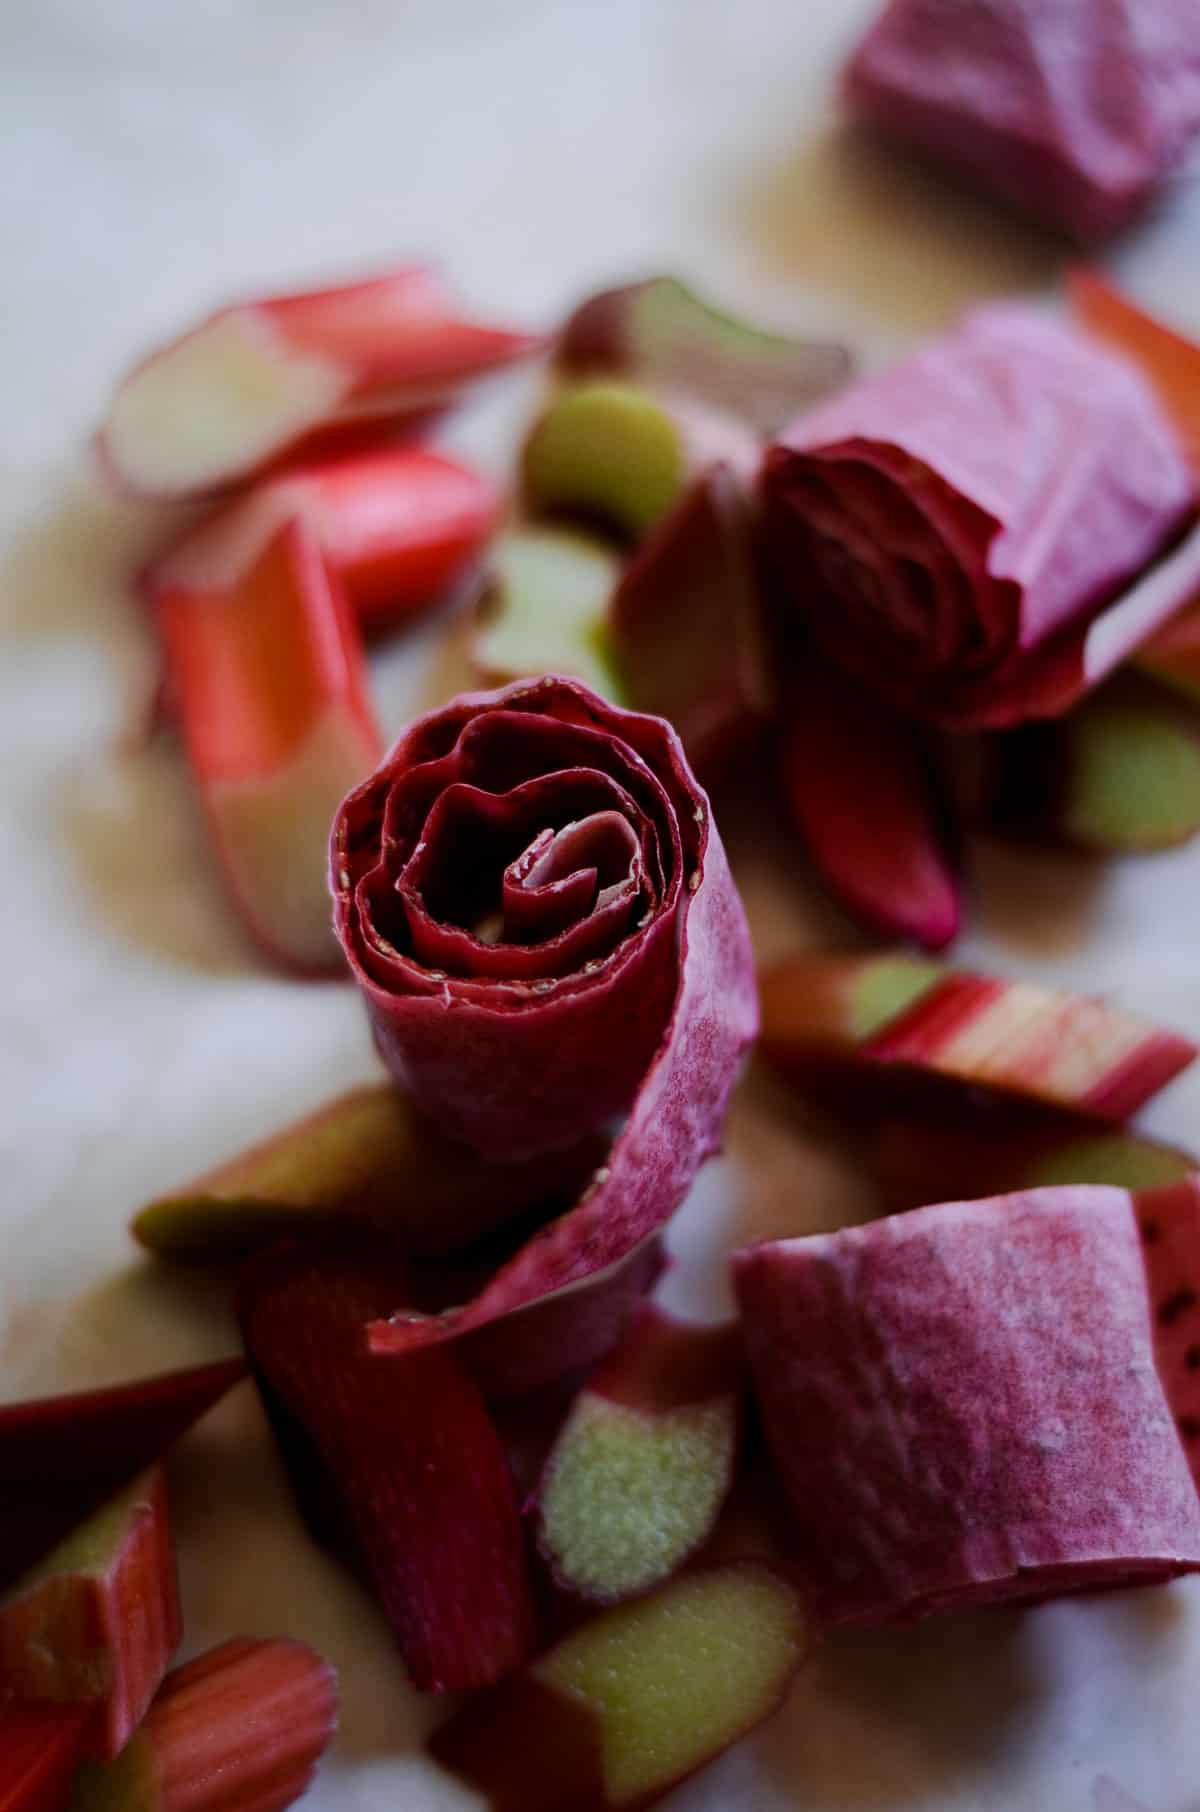 Pink fruit roll ups with rhubarb sitting around it.